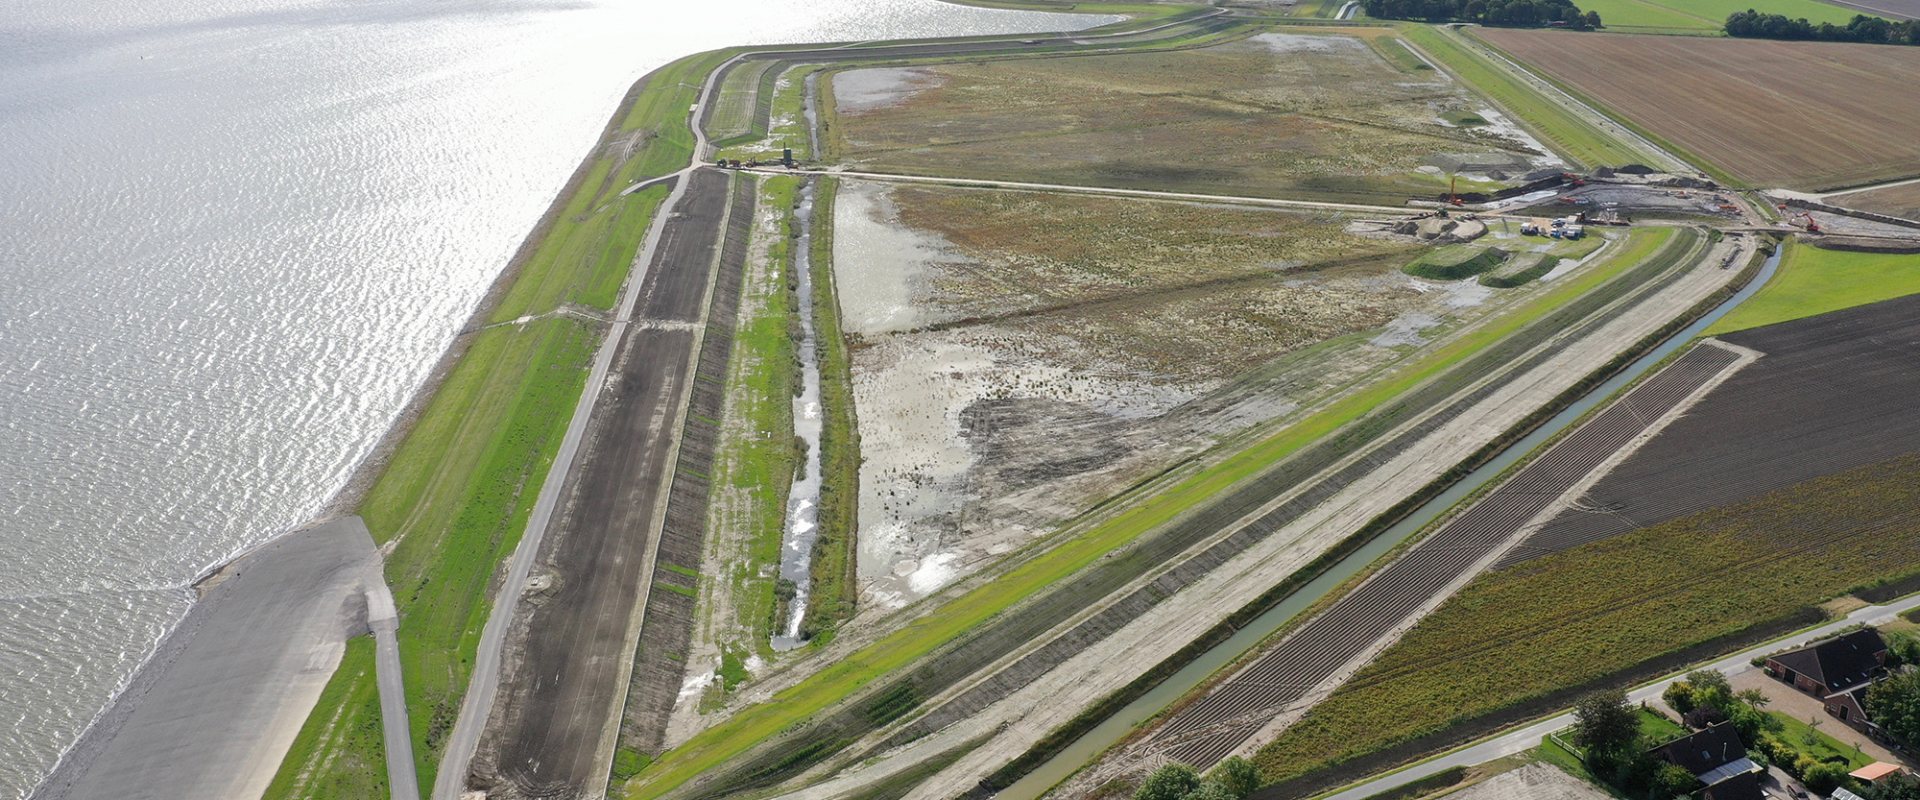 Twin dike section of sea levee near Delfzijl, the Netherlands